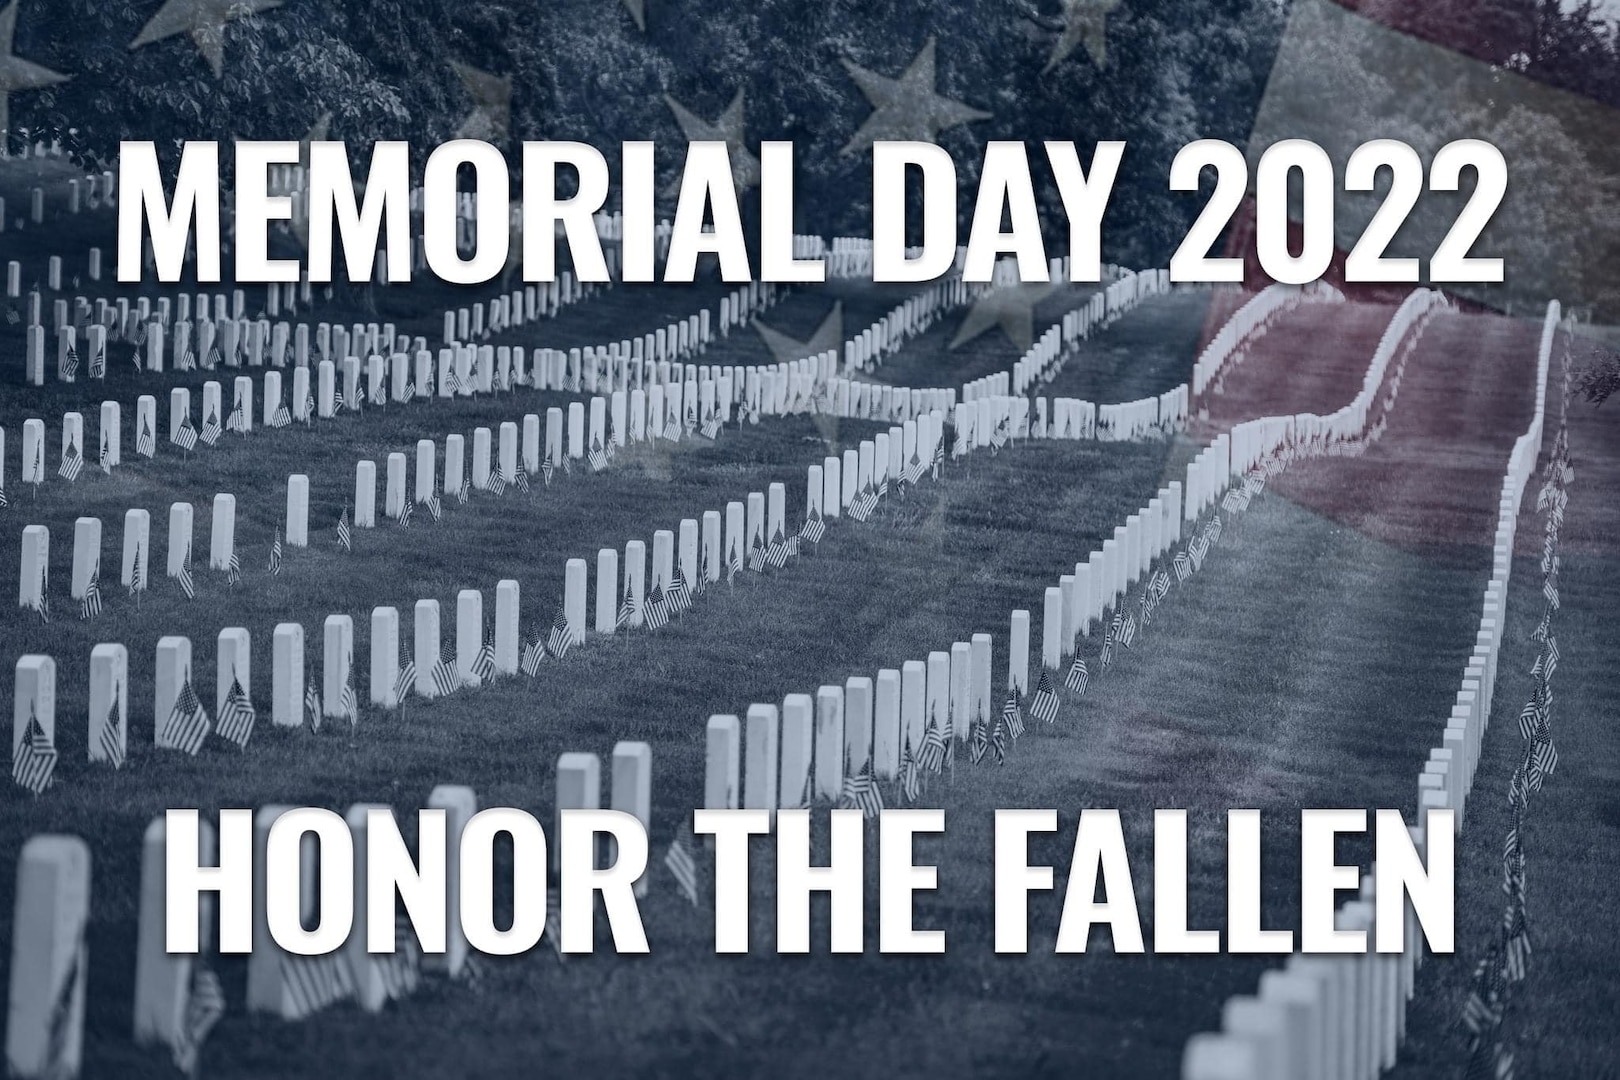 Today, we honor those who have given what President Abraham Lincoln called the last full measure of devotion in defense of our great country. On Memorial Day, take time to remember their sacrifice and the freedoms we enjoy today because they gave up all of their tomorrows. #MemorialDay #CapitalGuardians